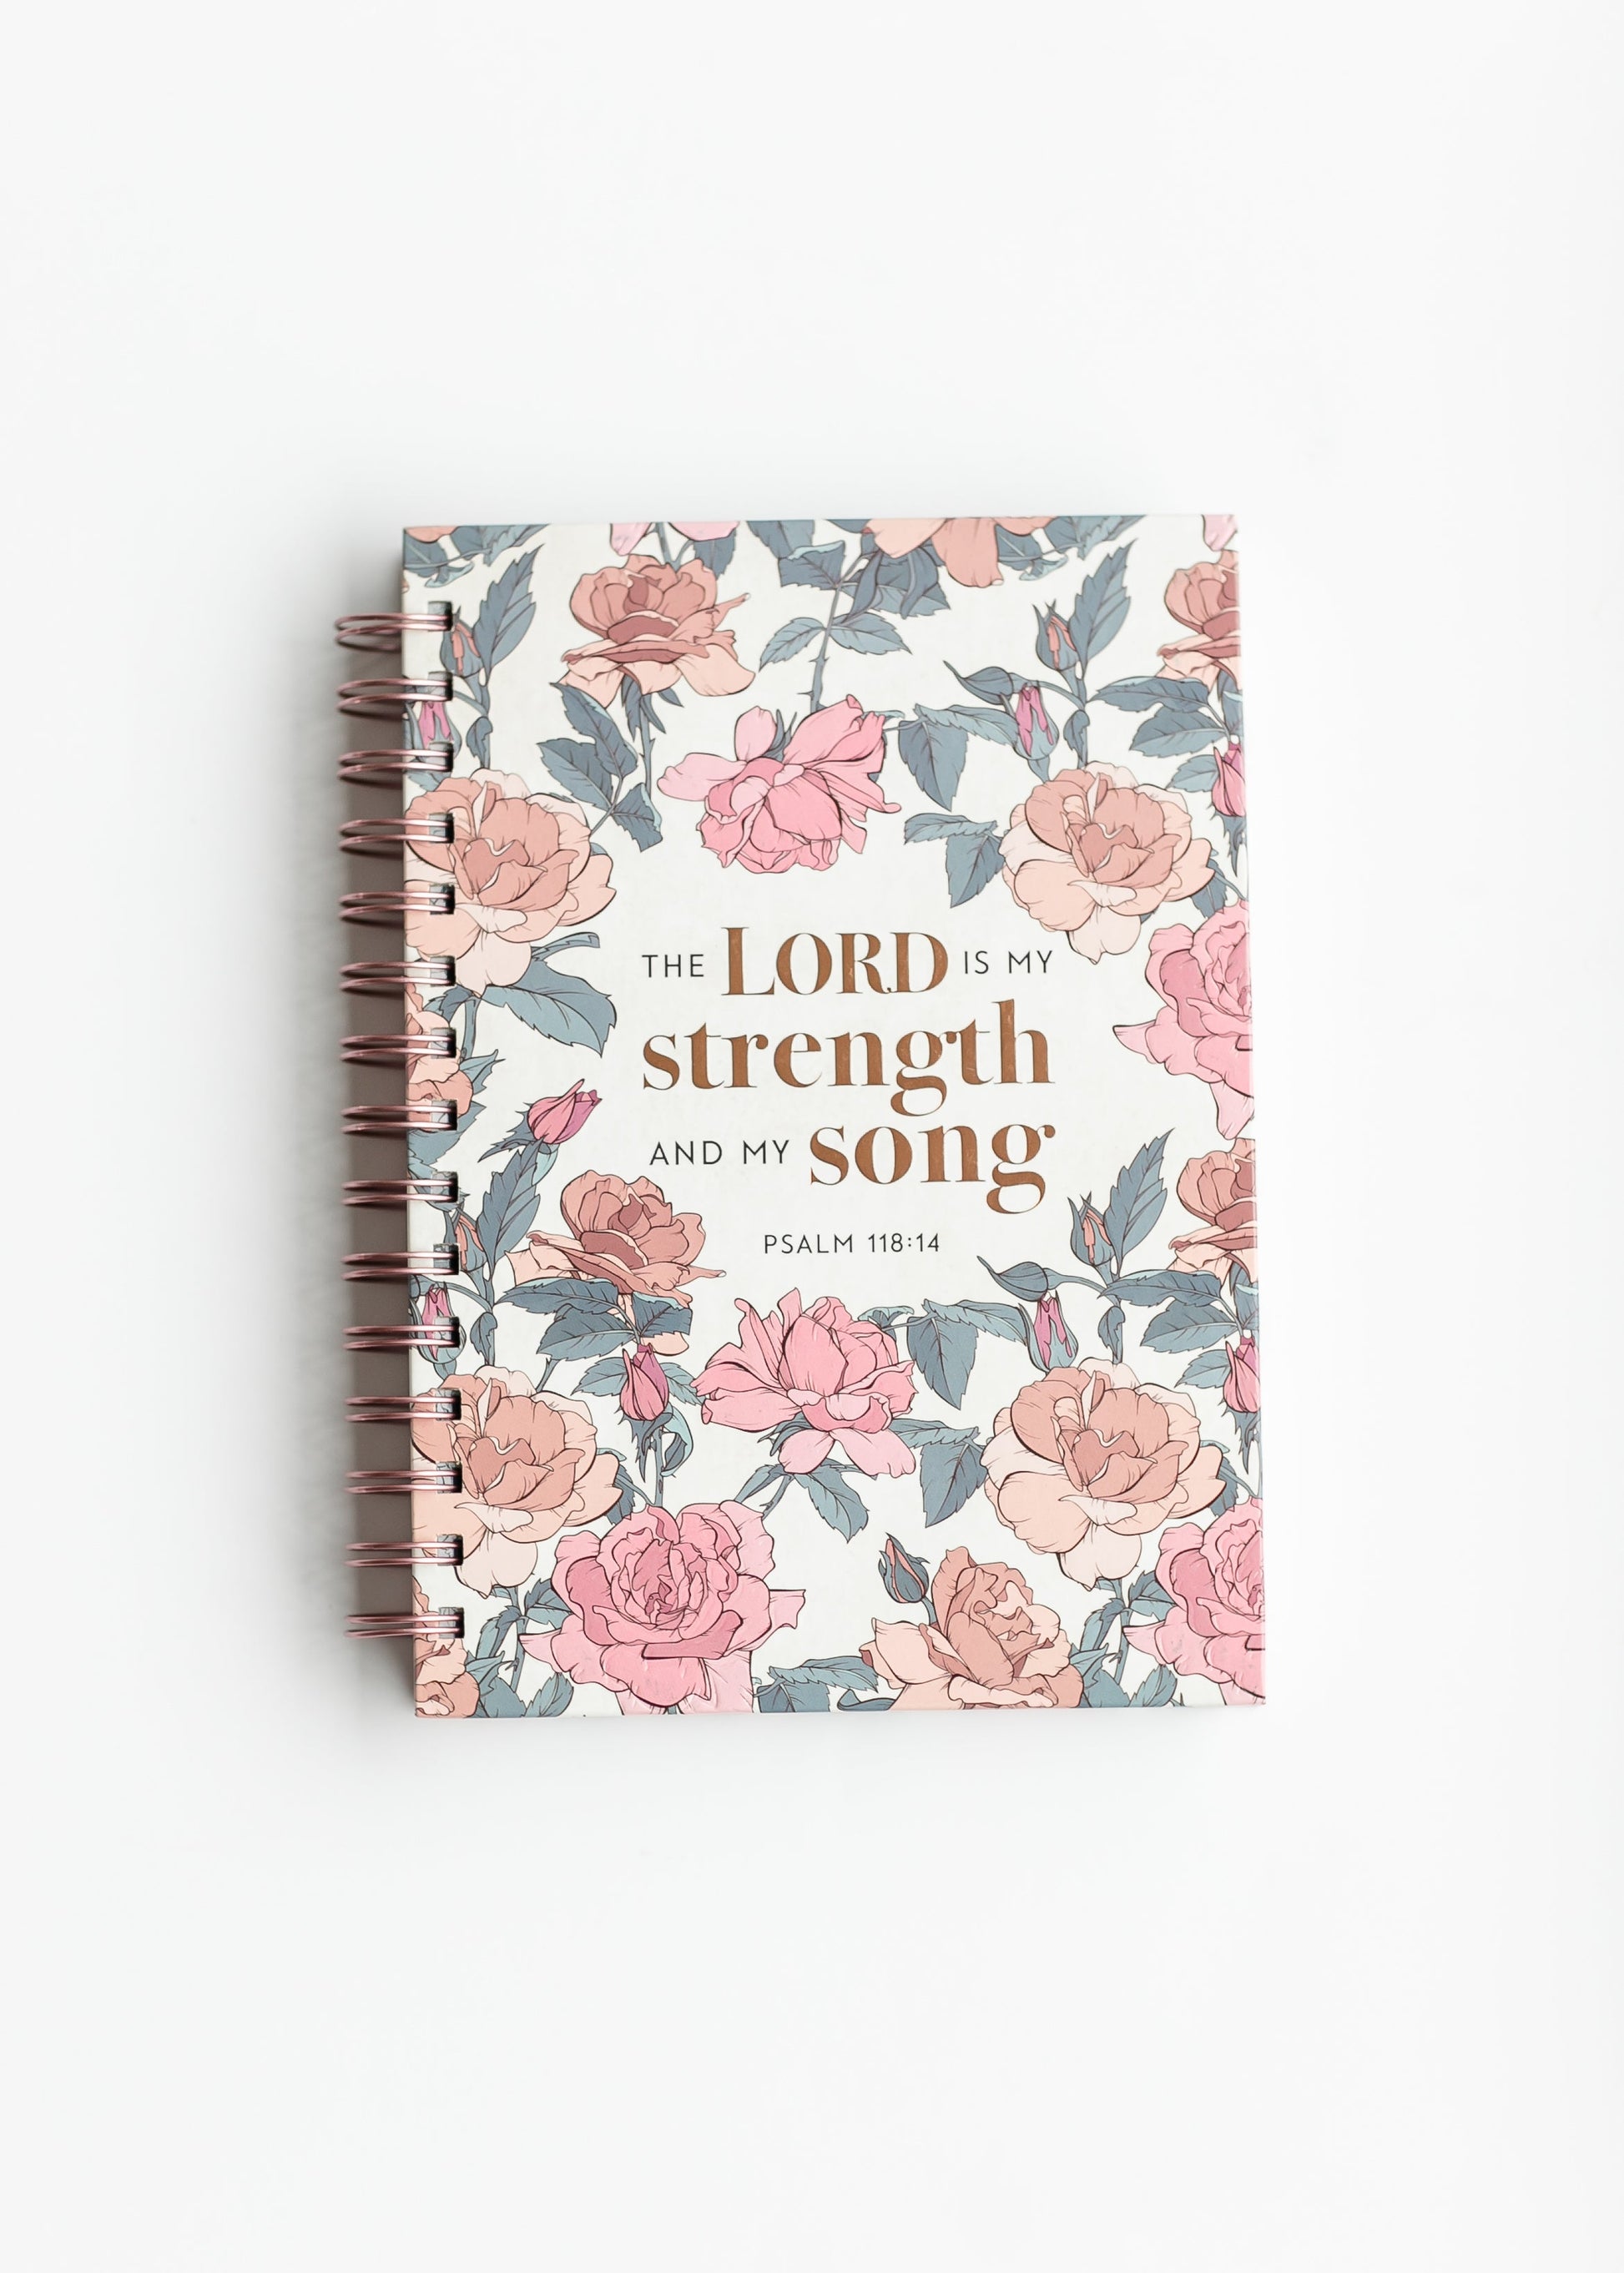 My Strength and My Song  Wirebound Journal Gifts